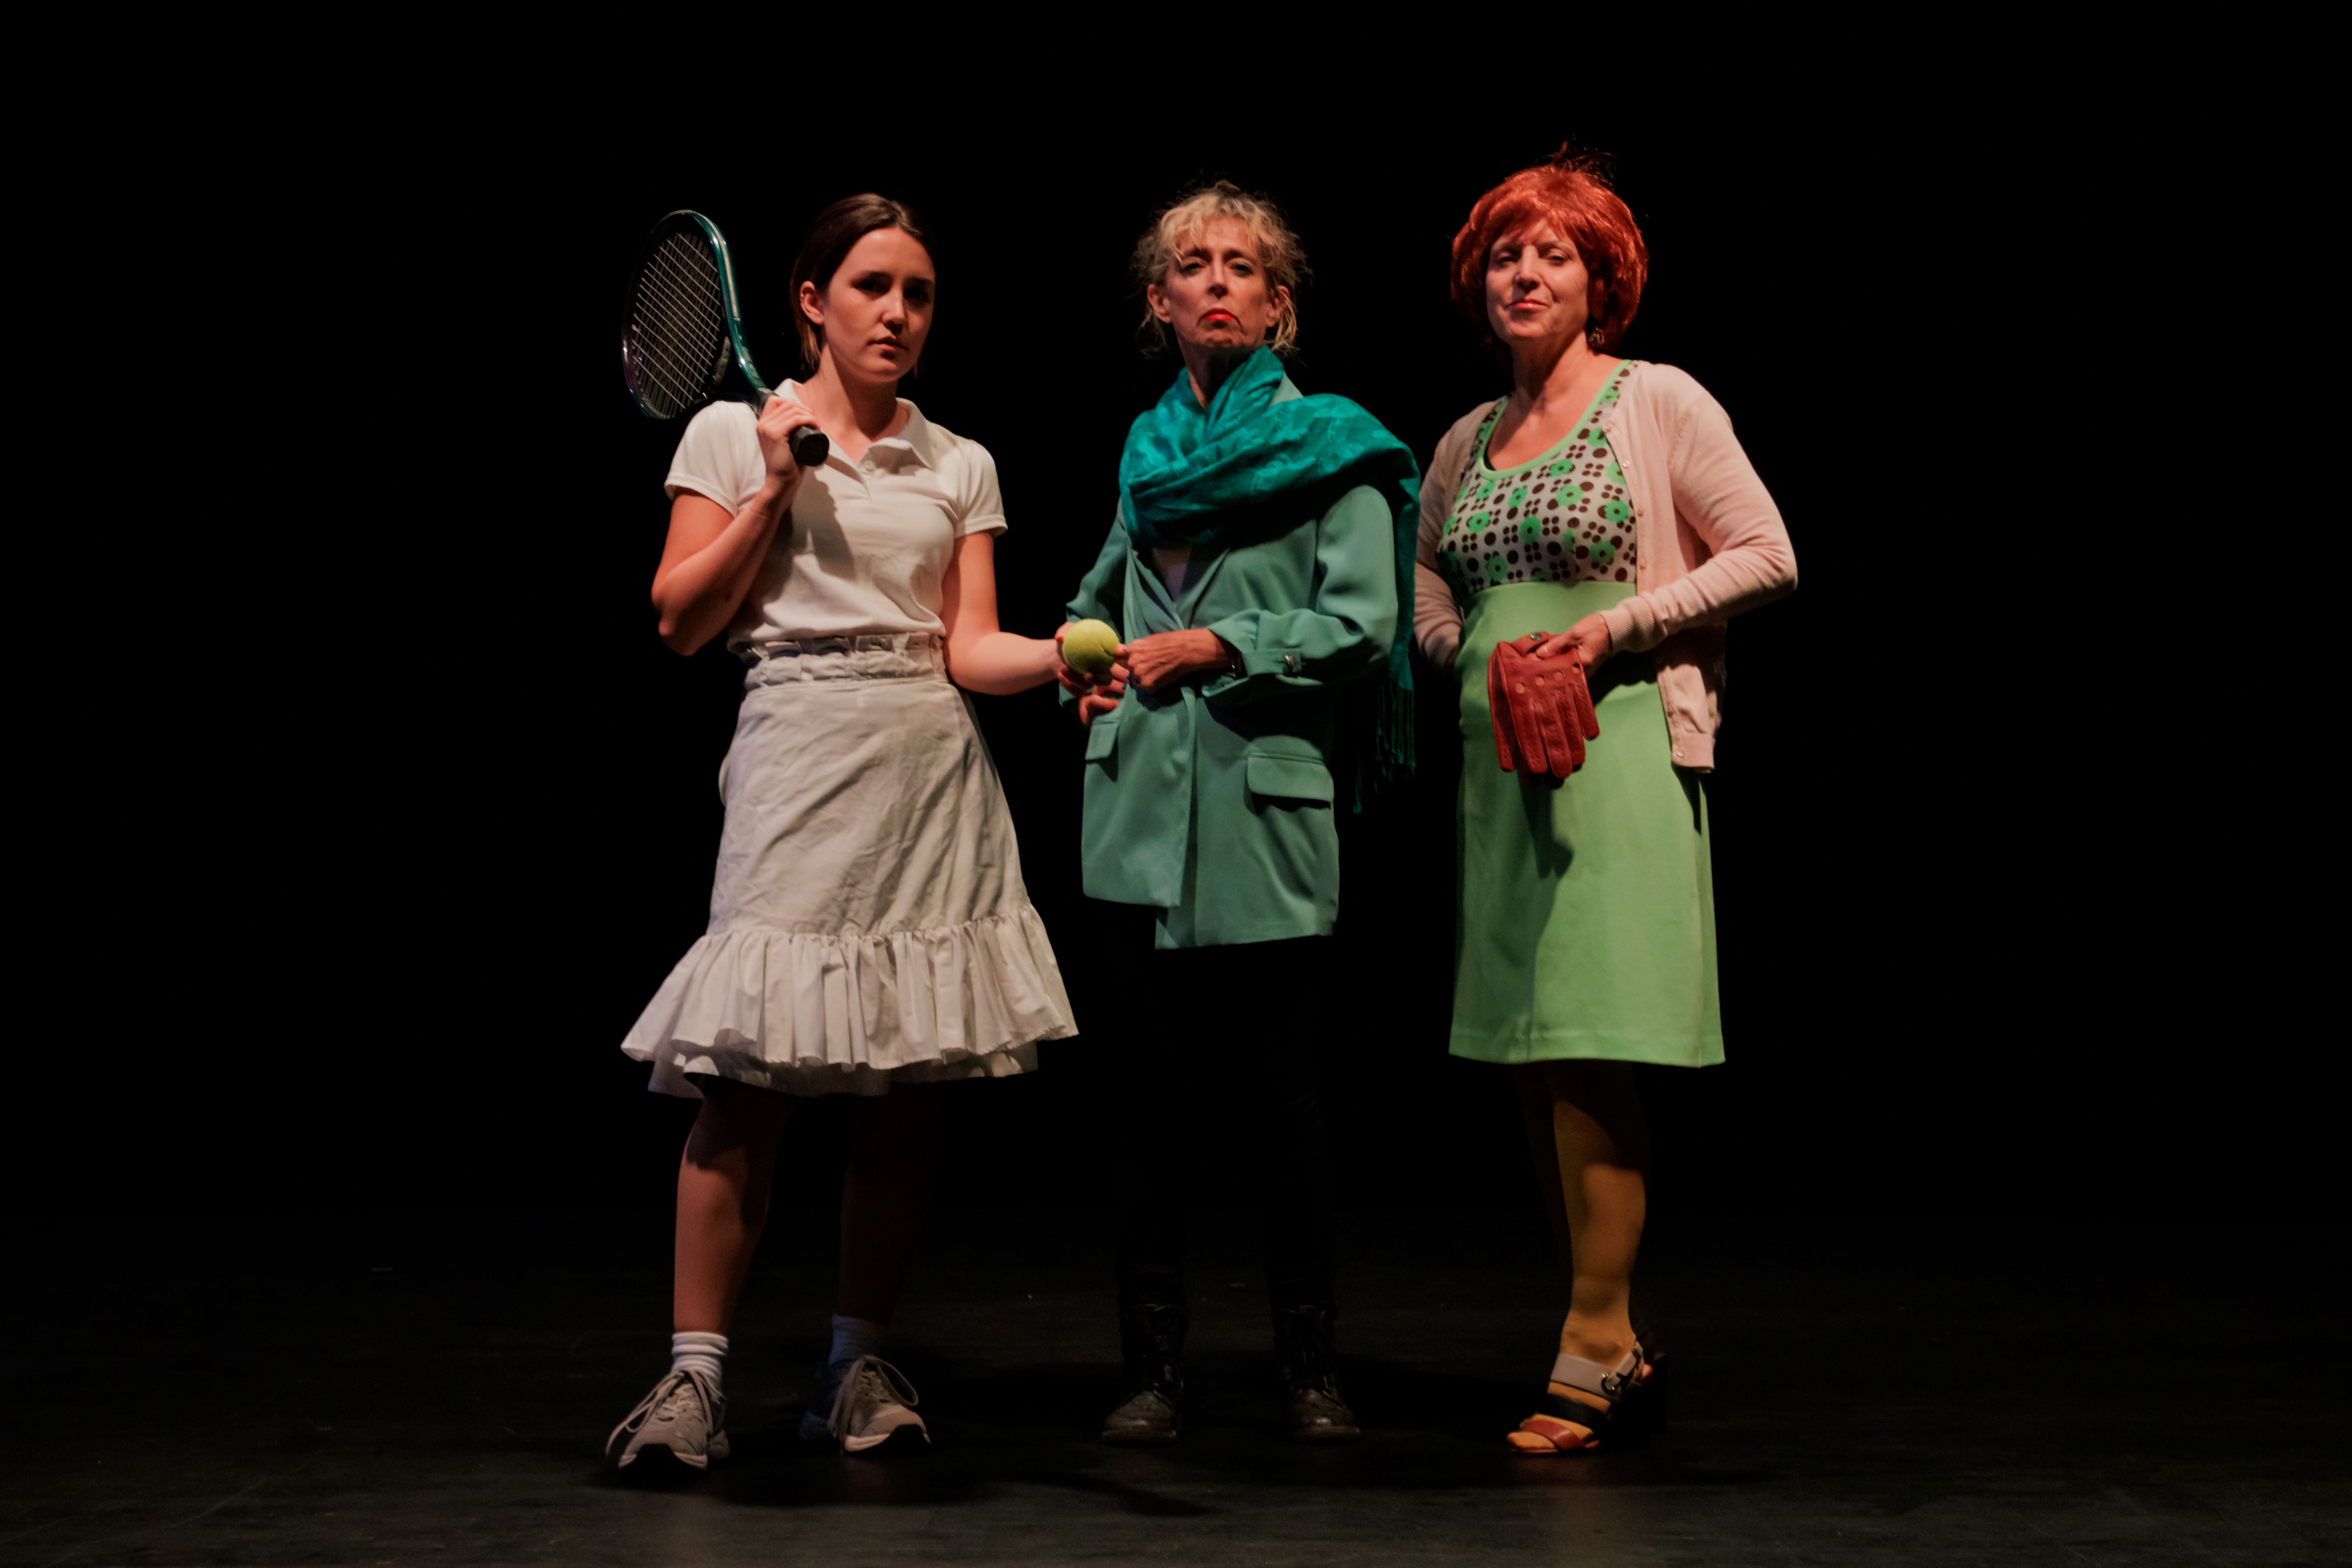 Three women, one wears a tennis outfit, one a green jacket and one a 1960s style dress